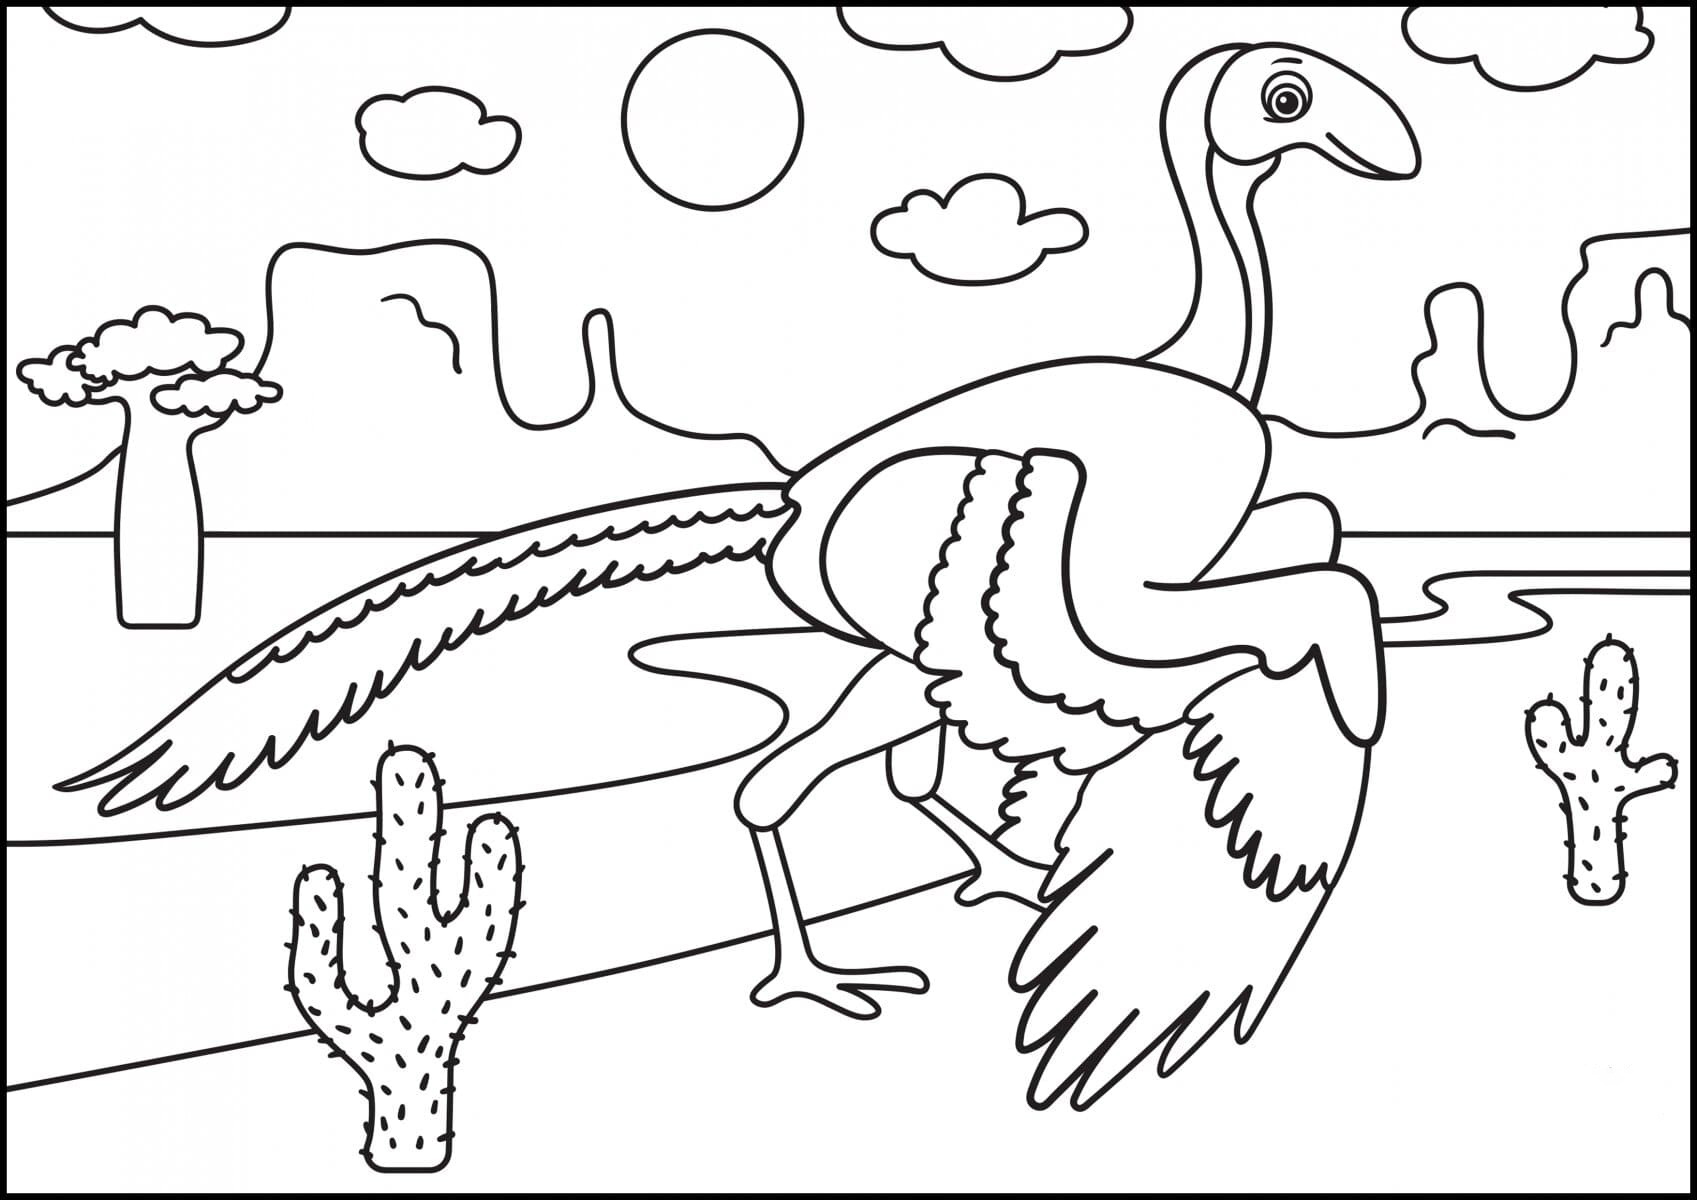 Archaeopteryx Dinosaur Drawing Simple For Preschool Coloring Pages